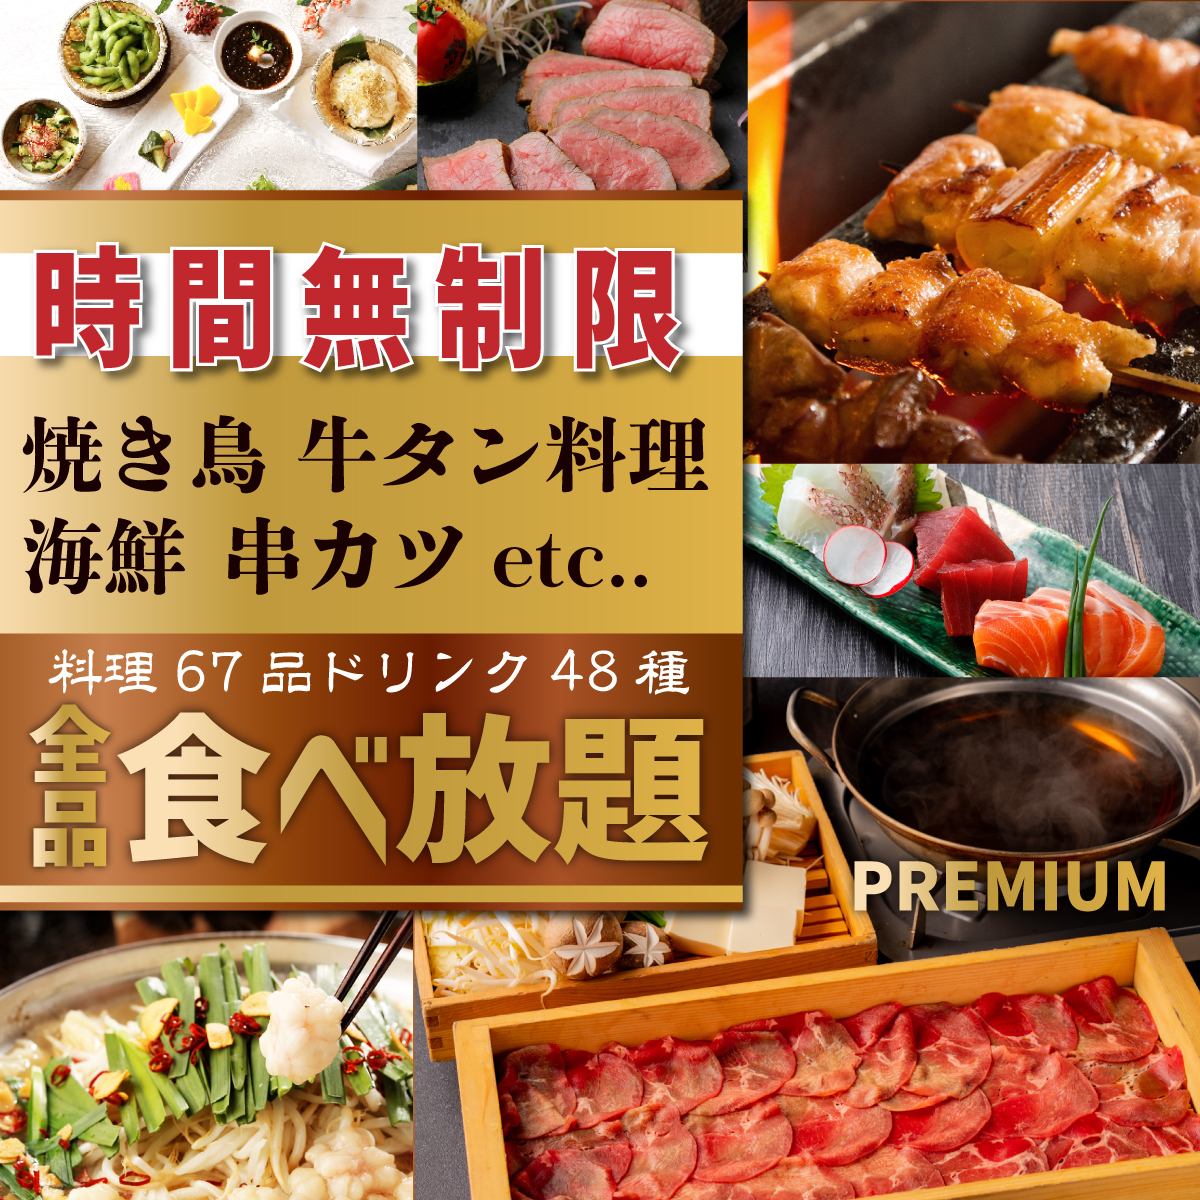 All-you-can-eat and drink on all items starts from 2,980 yen! Unlimited time all-you-can-eat is very popular!